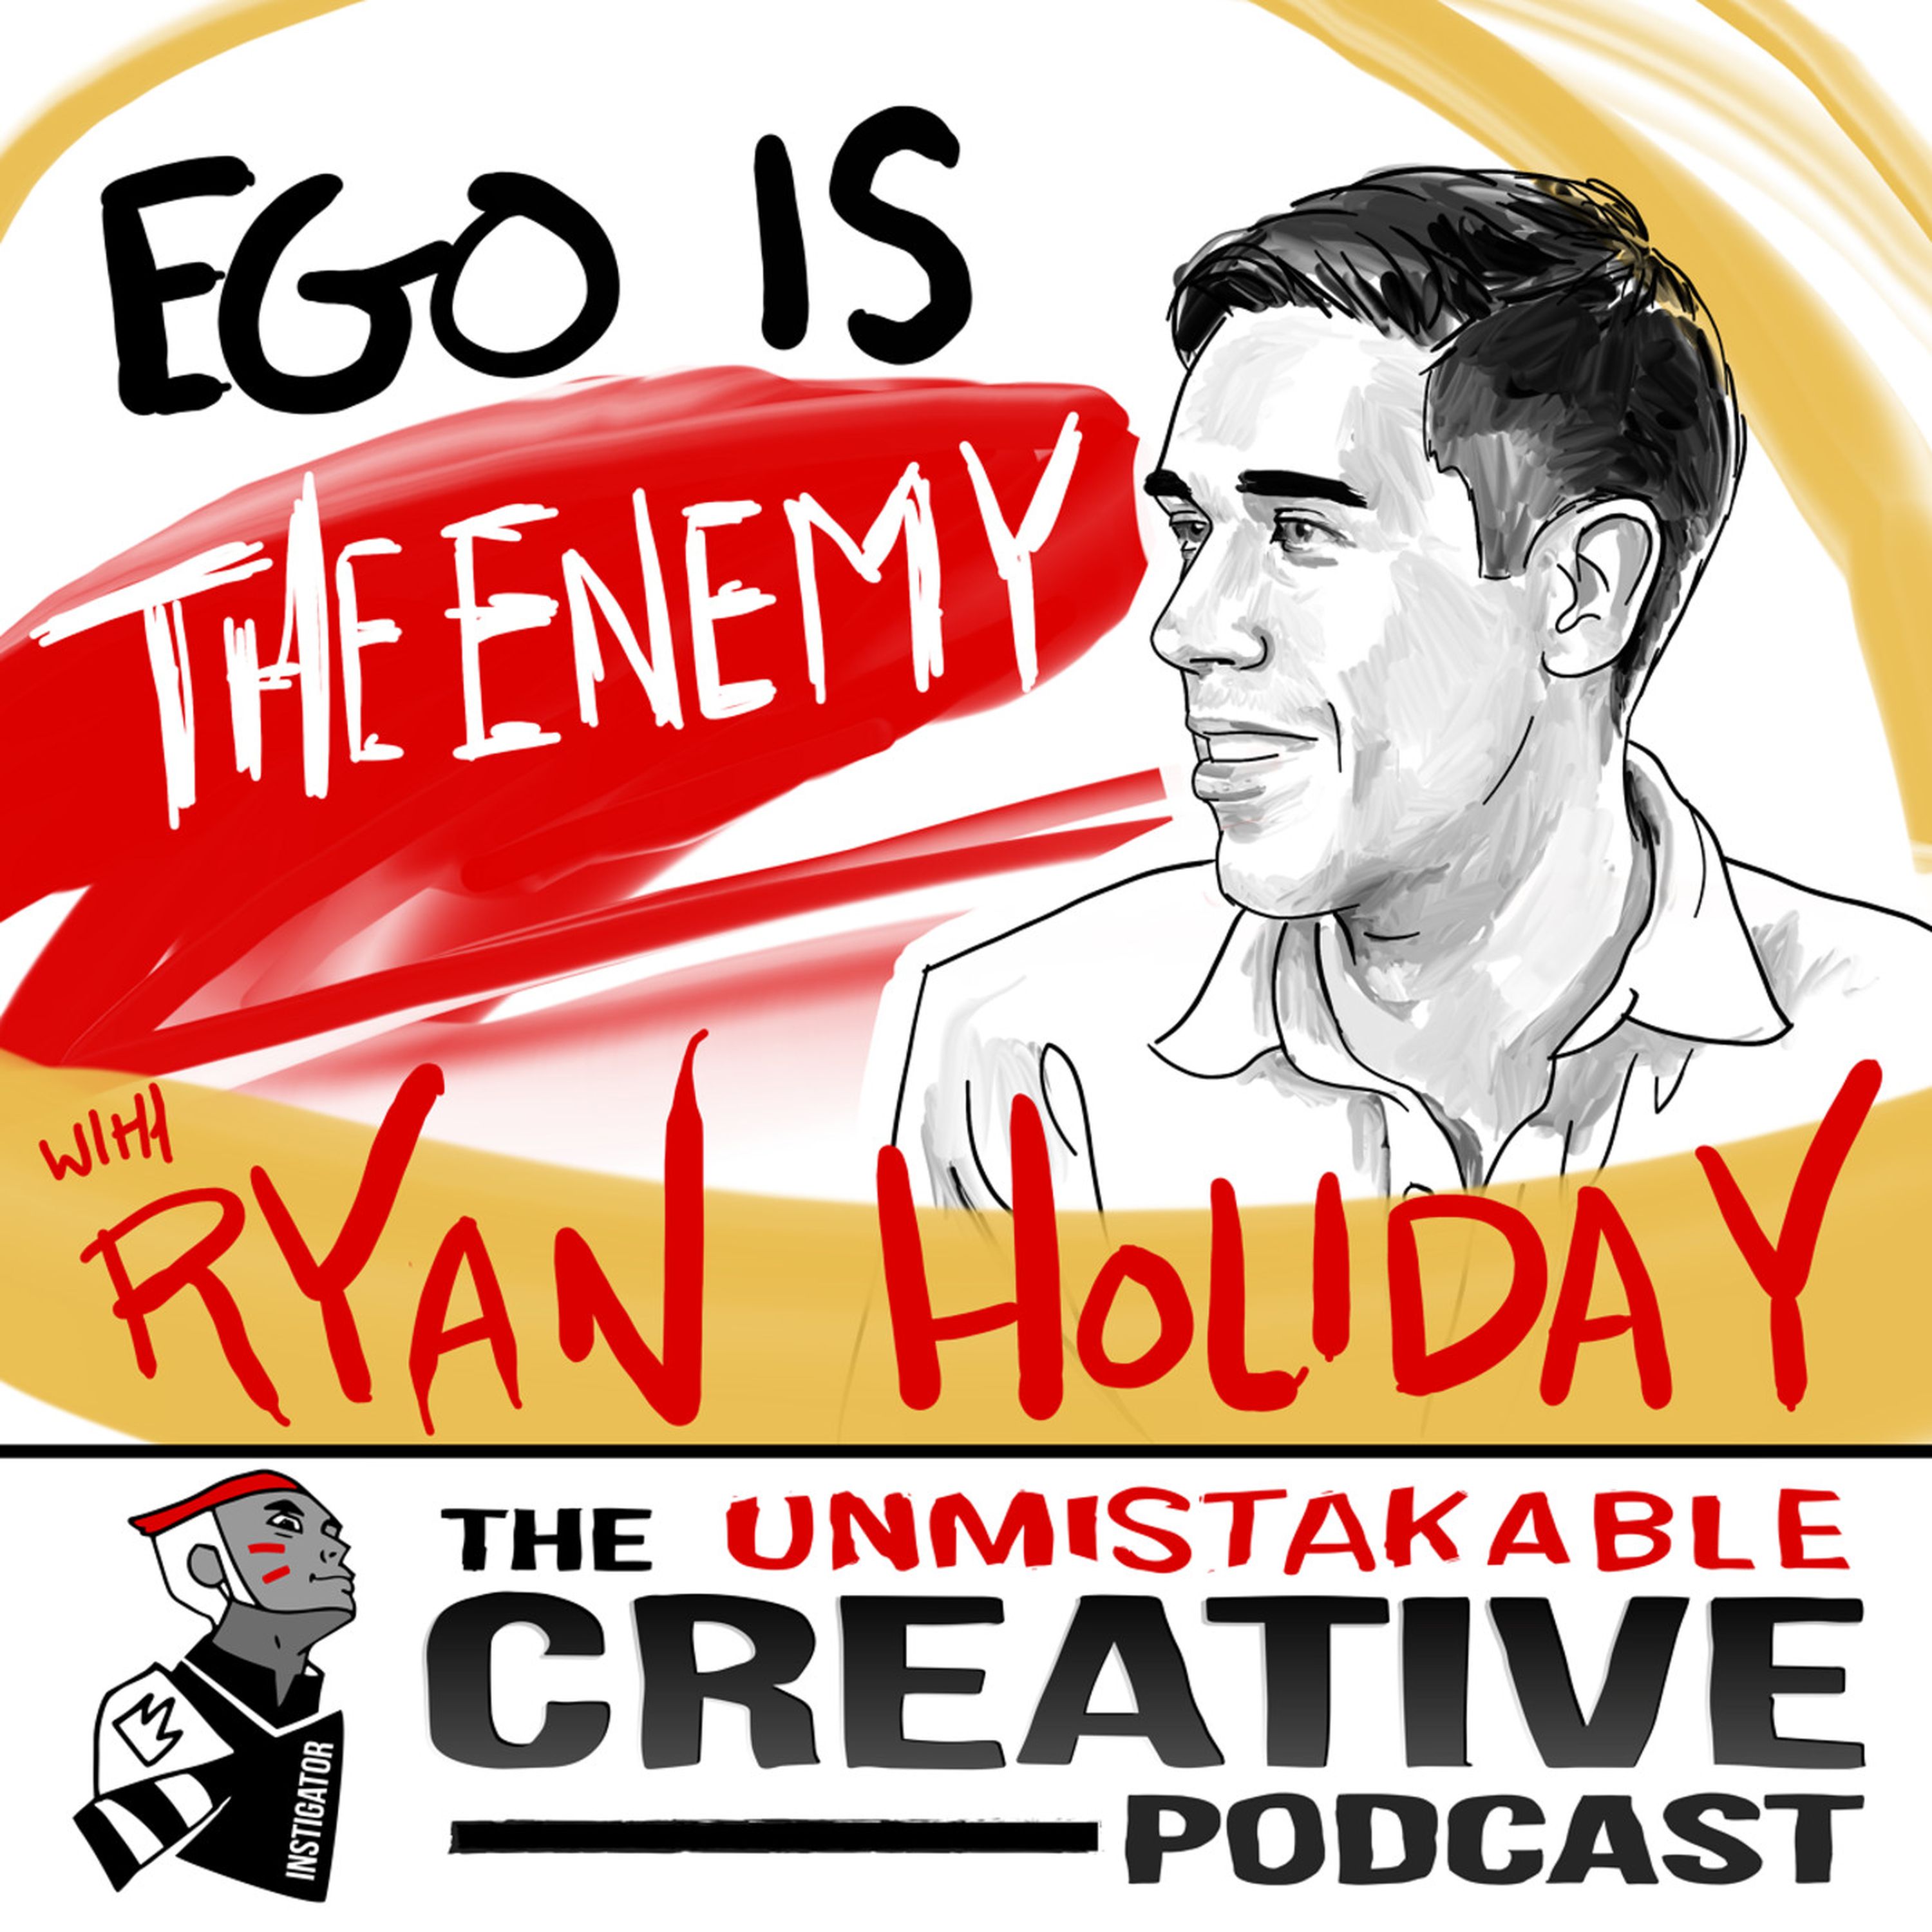 Best of: Ego is The Enemy with Ryan Holiday Image